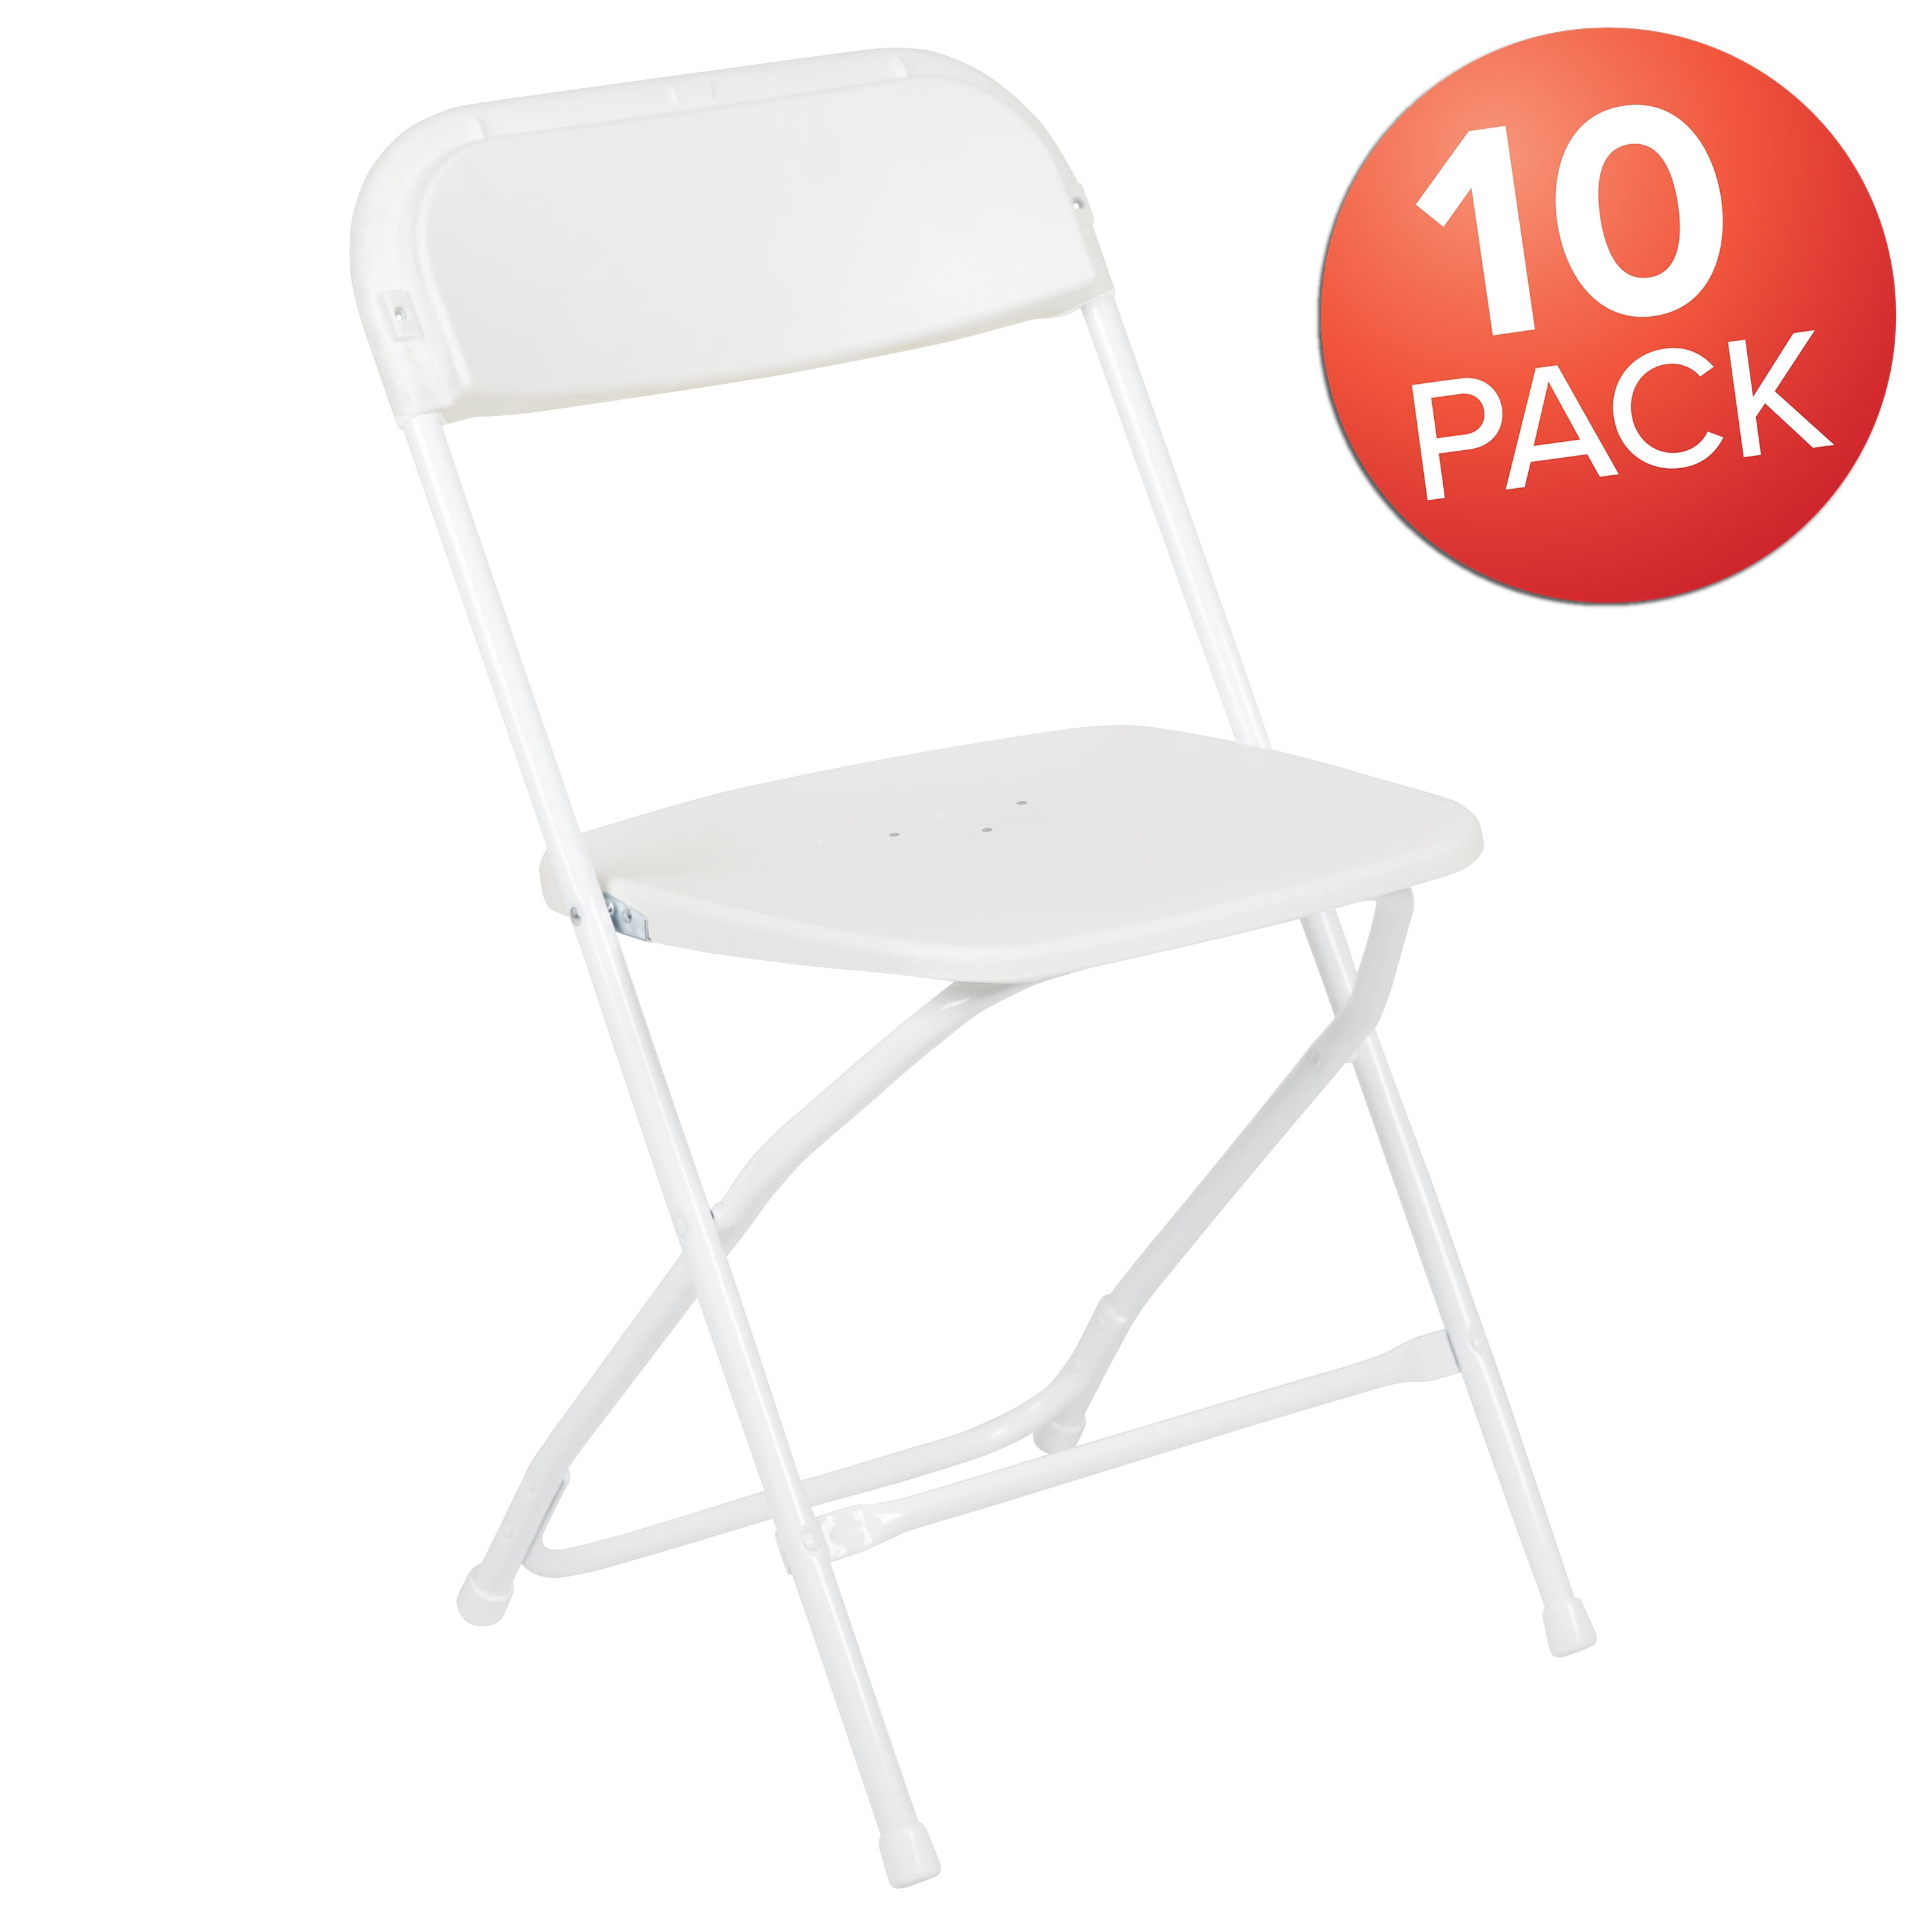 650 Lbs Capacity Commercial Quality Burgundy Plastic Folding Chairs 100 PACK 